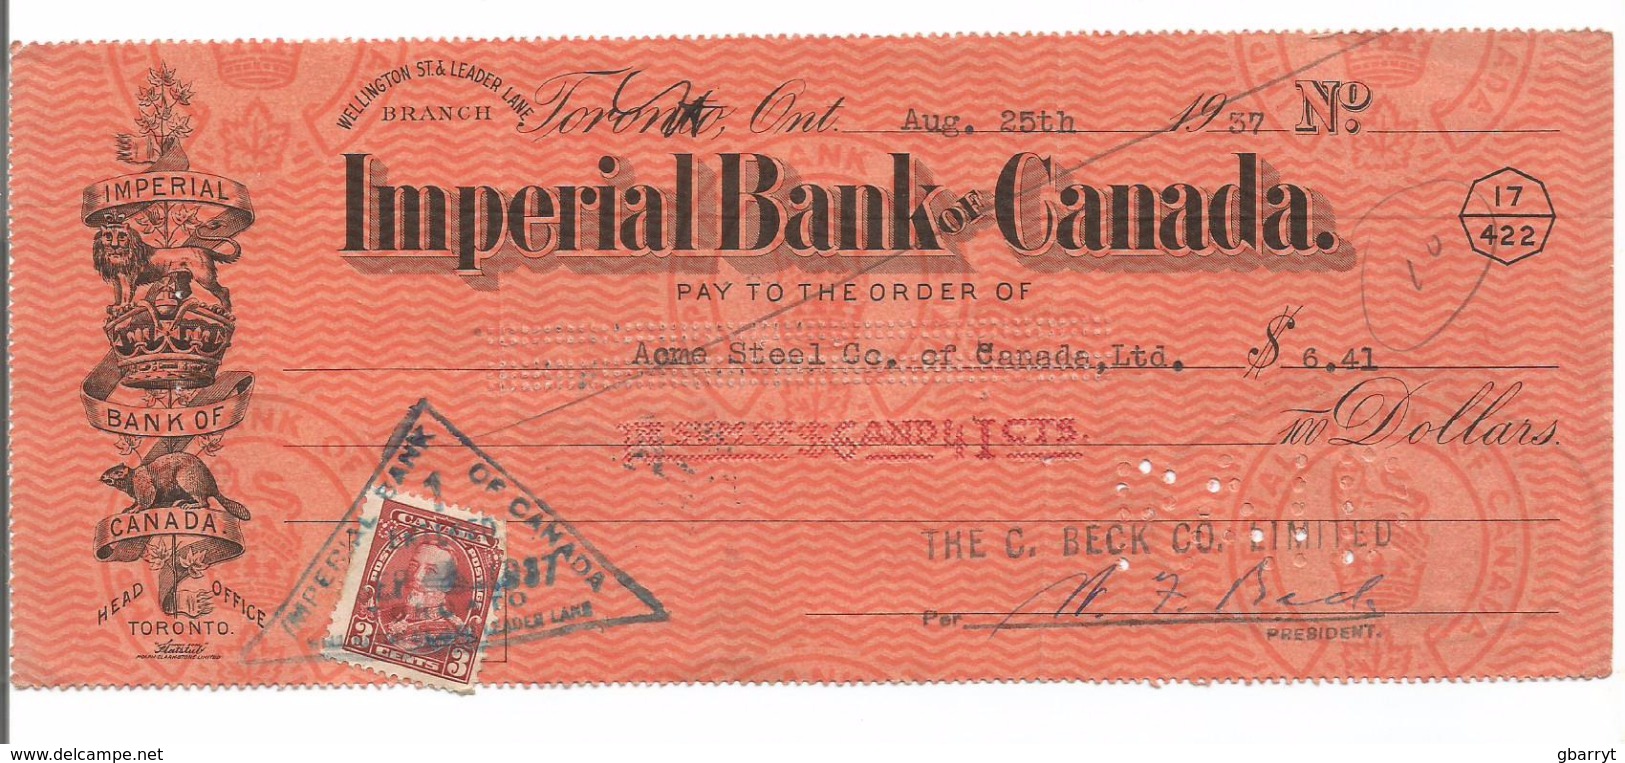 Imperial Bank Of Canada Wellington St. & Leader Lane Branch Toronto Aug 25 1957 - Cheques & Traverler's Cheques